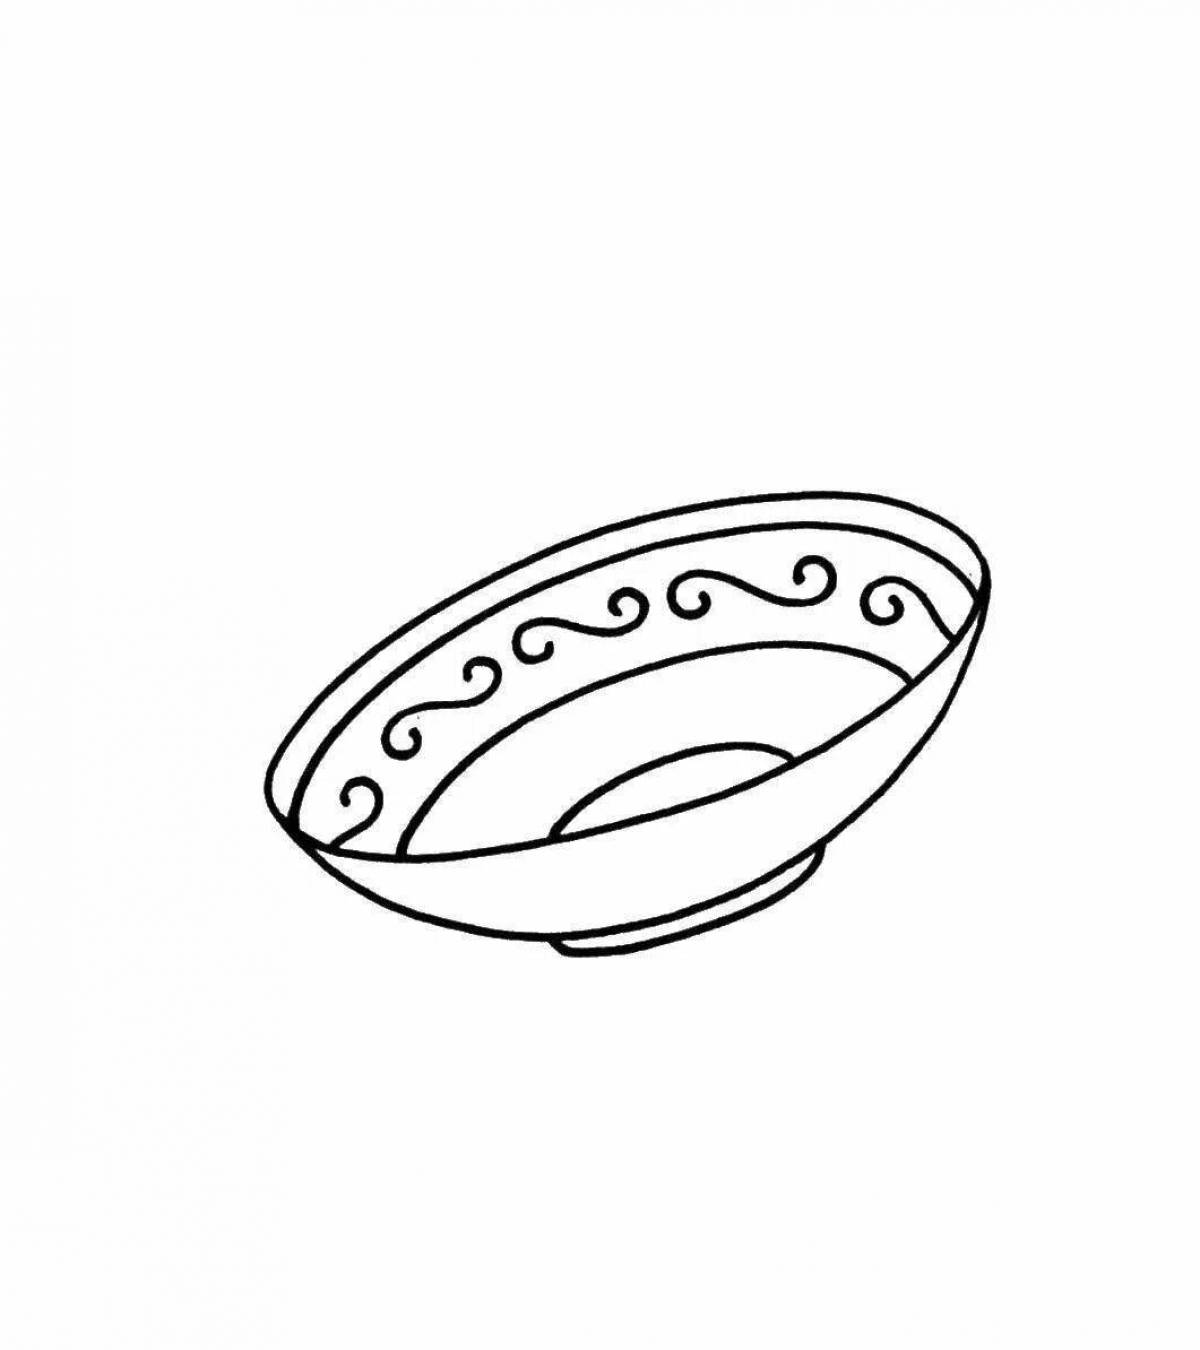 Playful baby saucer coloring page